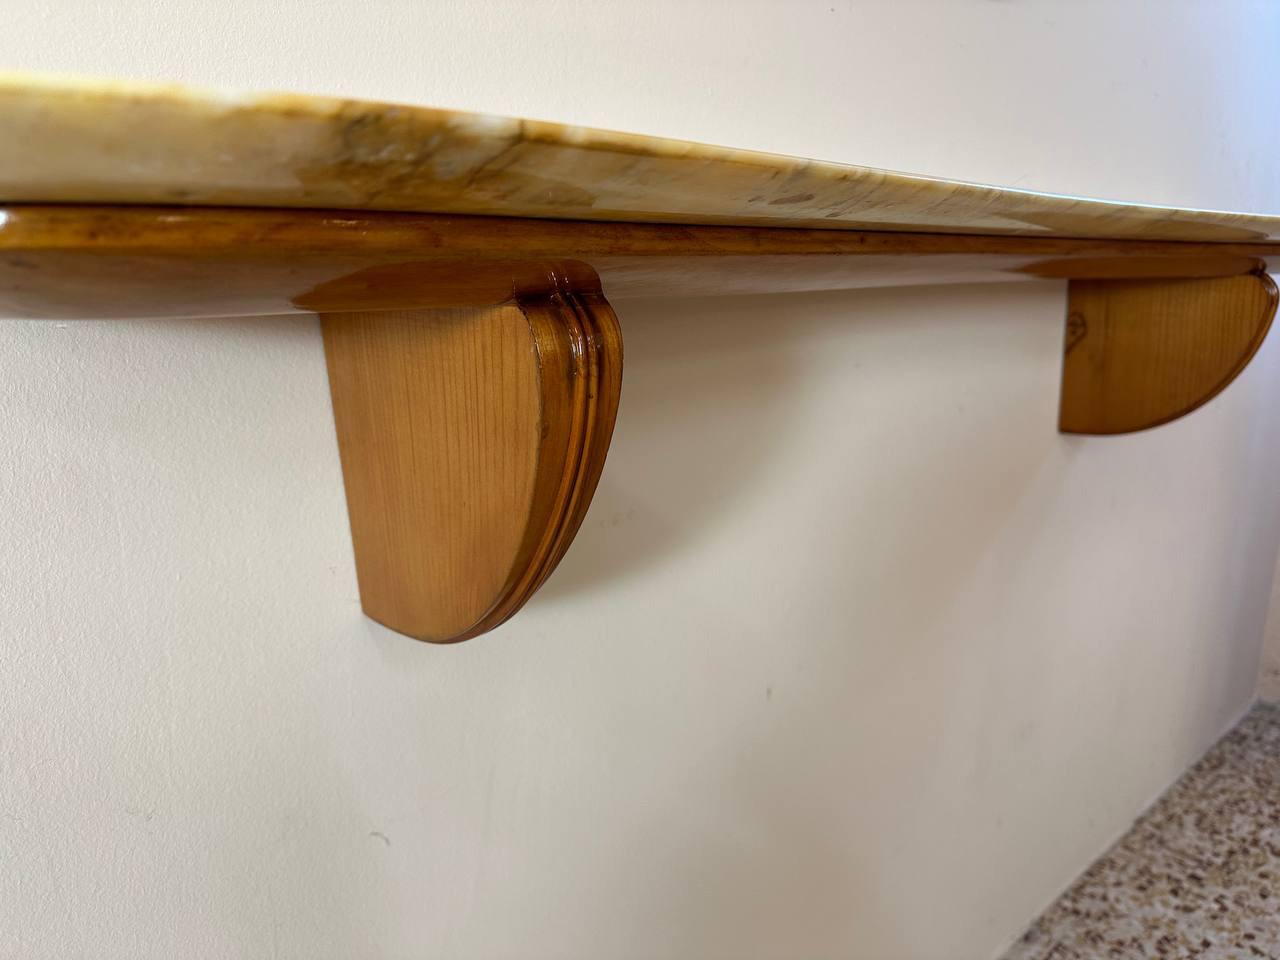 Italian Art Deco Cherry Wood and Siena Marble Console By Paolo Buffa, 1940s For Sale 1